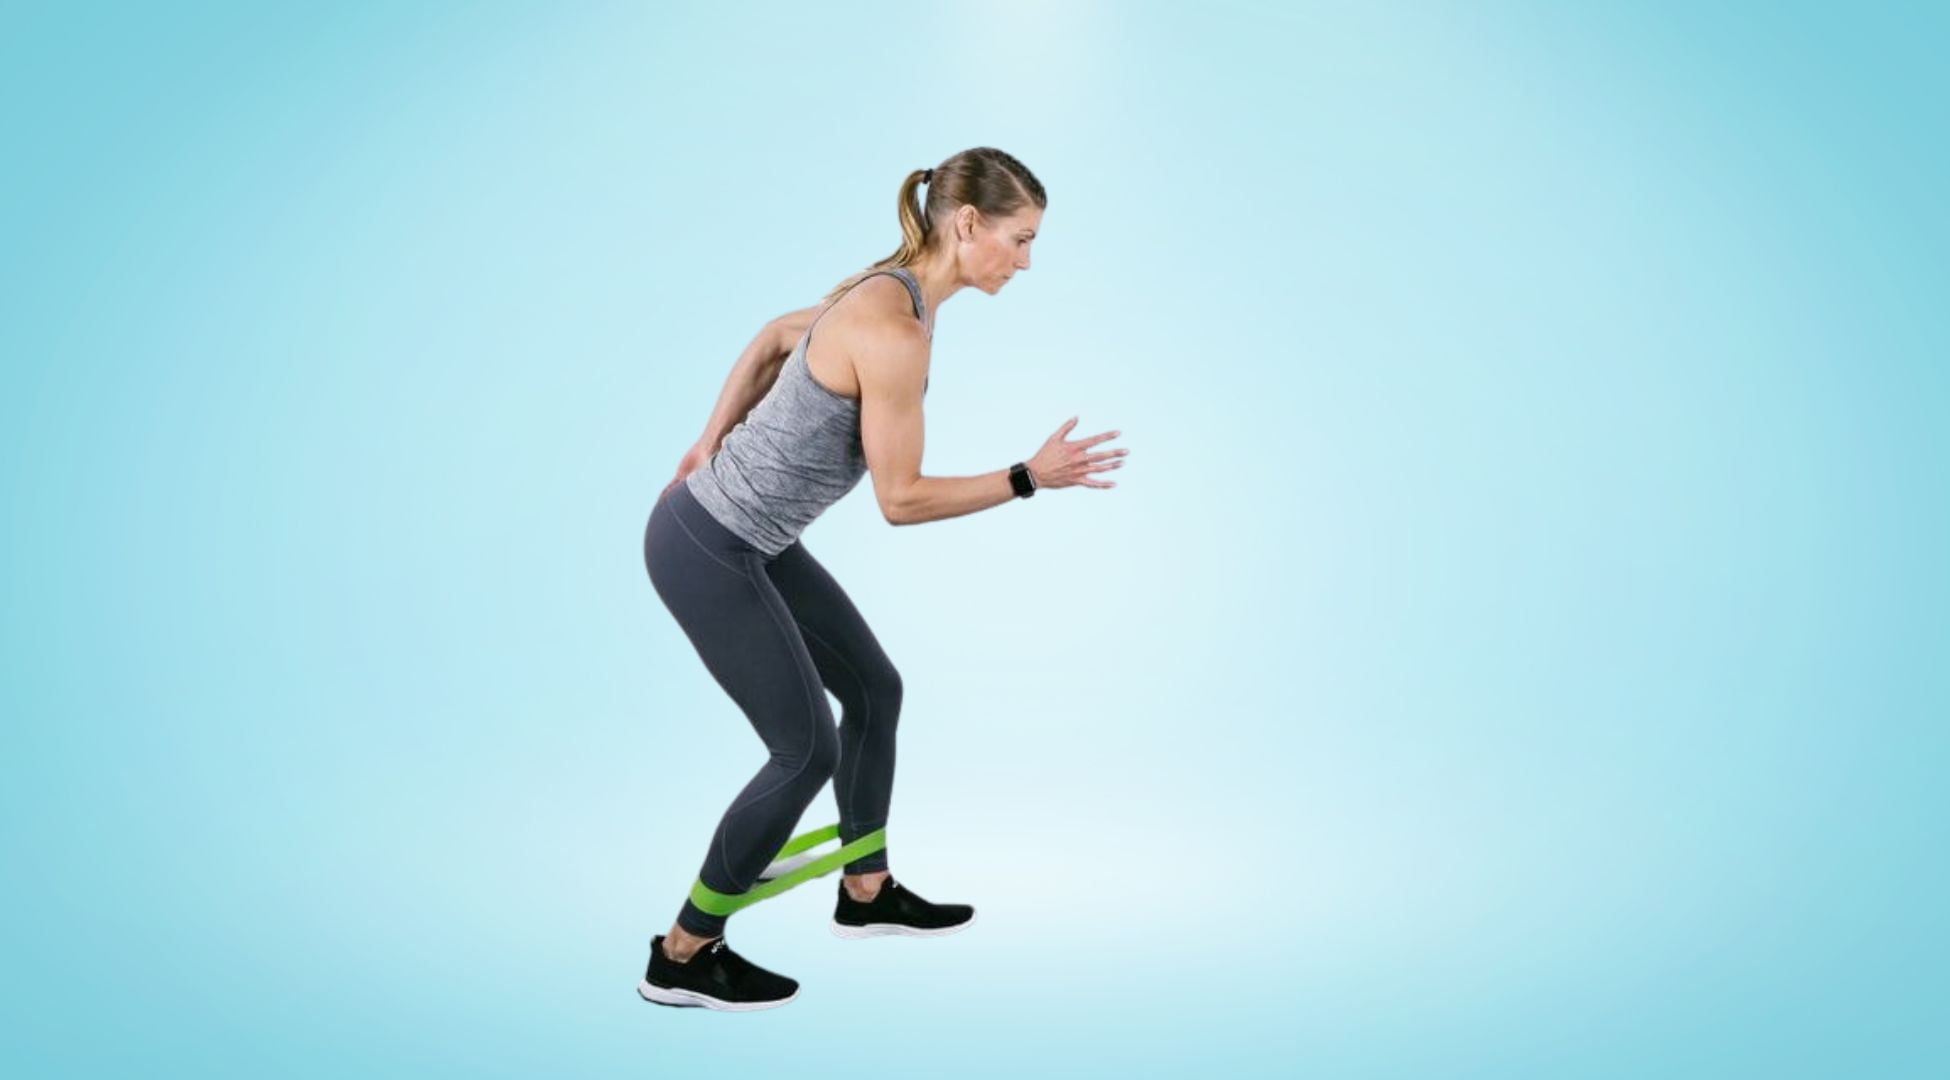 Monster Walk (Activate Your Glutes) Resistance Band Exercise